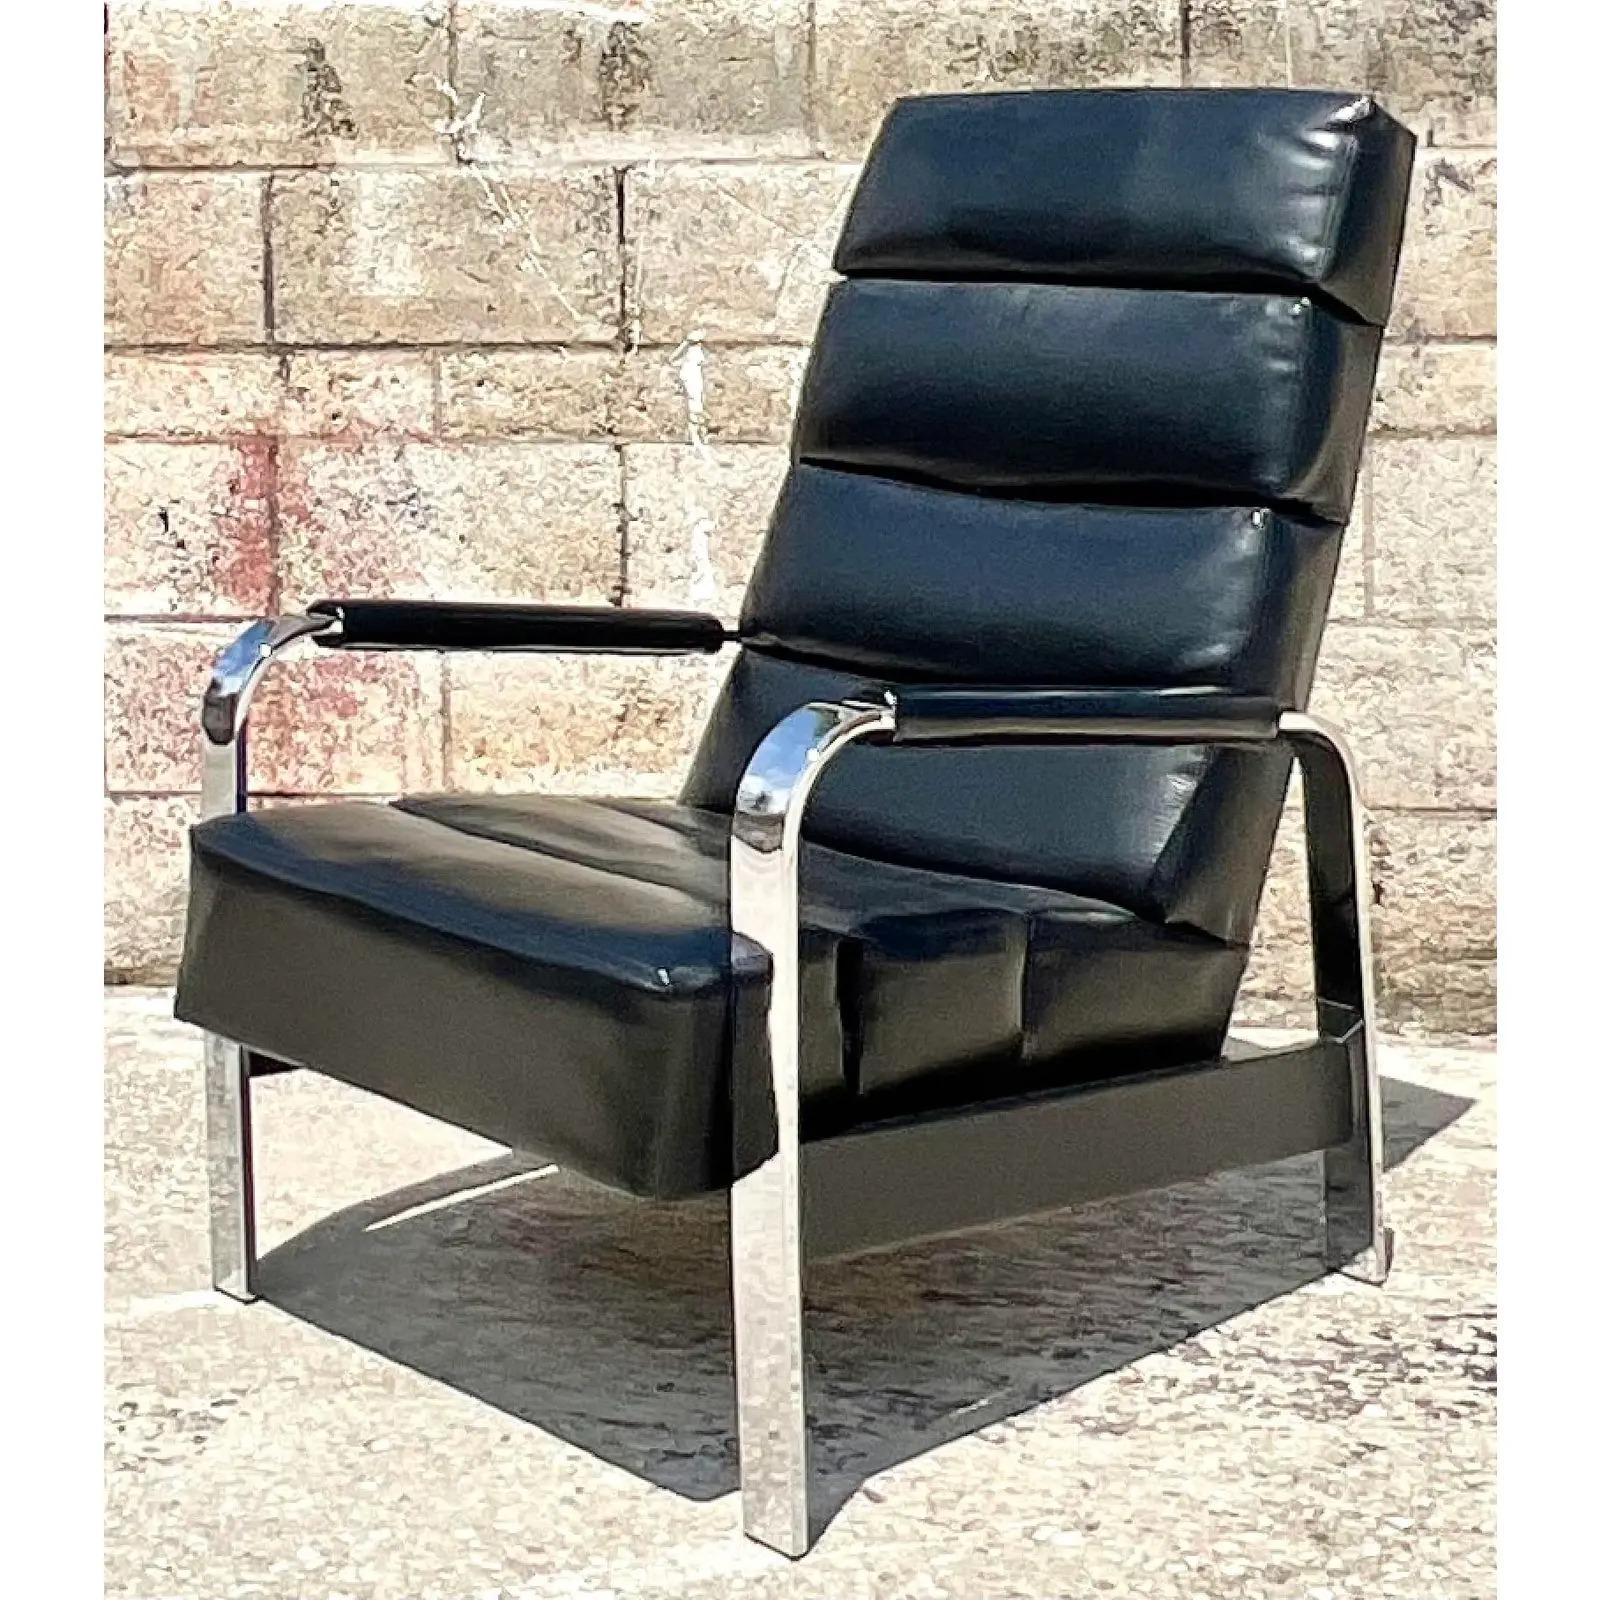 Fantastic vintage MCM reclining chair. Made by the iconic Milo Baughman for James Inc. beautiful black leather with flat bar chrome frame. Signed on the bottom. Acquired from a Palm Beach estate.